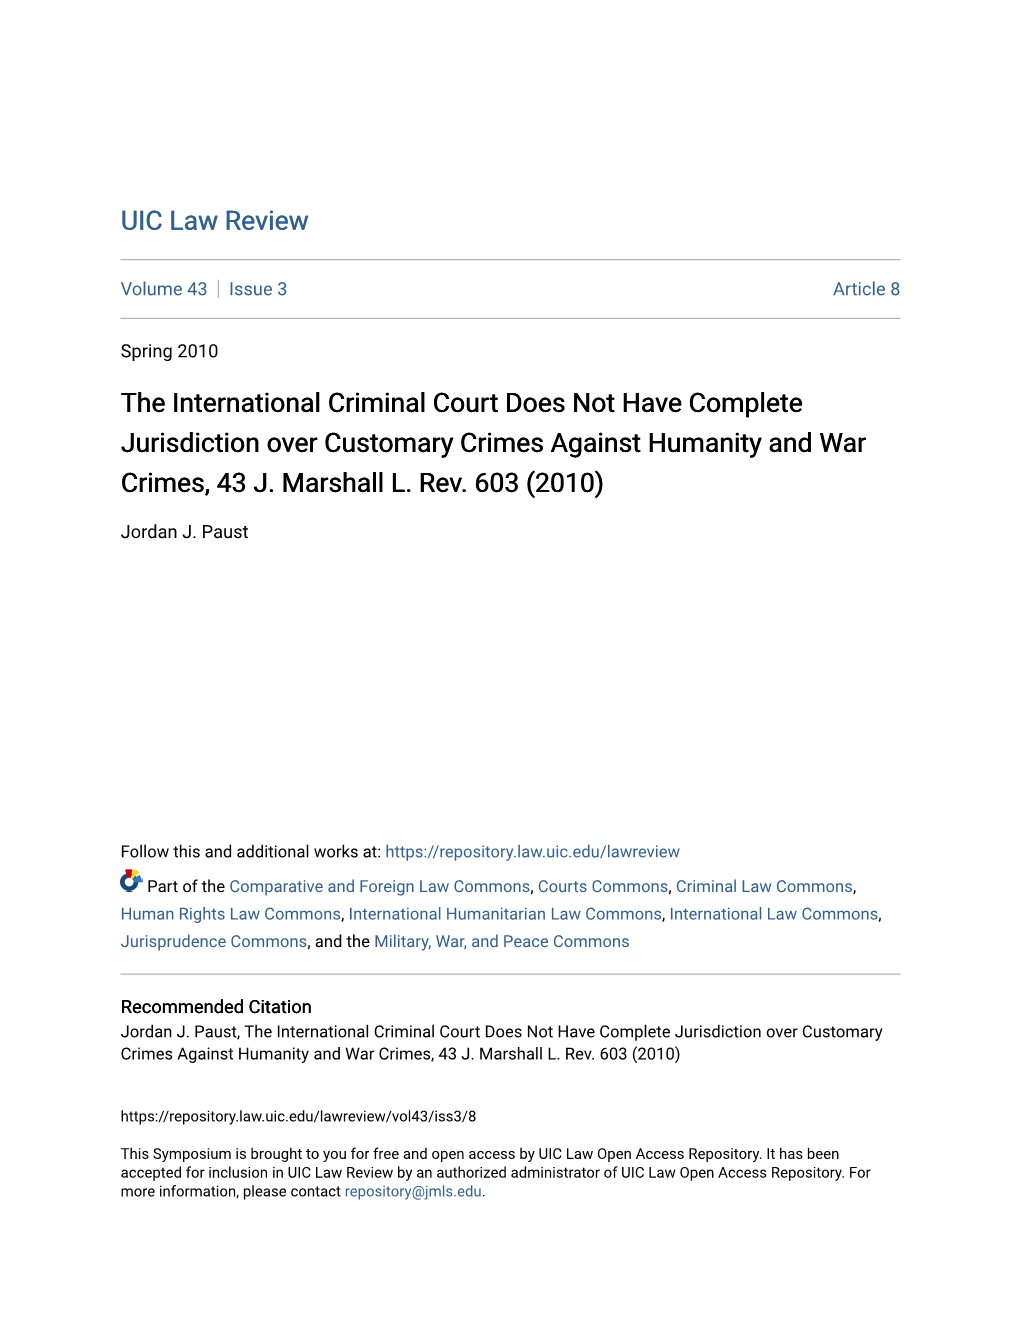 The International Criminal Court Does Not Have Complete Jurisdiction Over Customary Crimes Against Humanity and War Crimes, 43 J